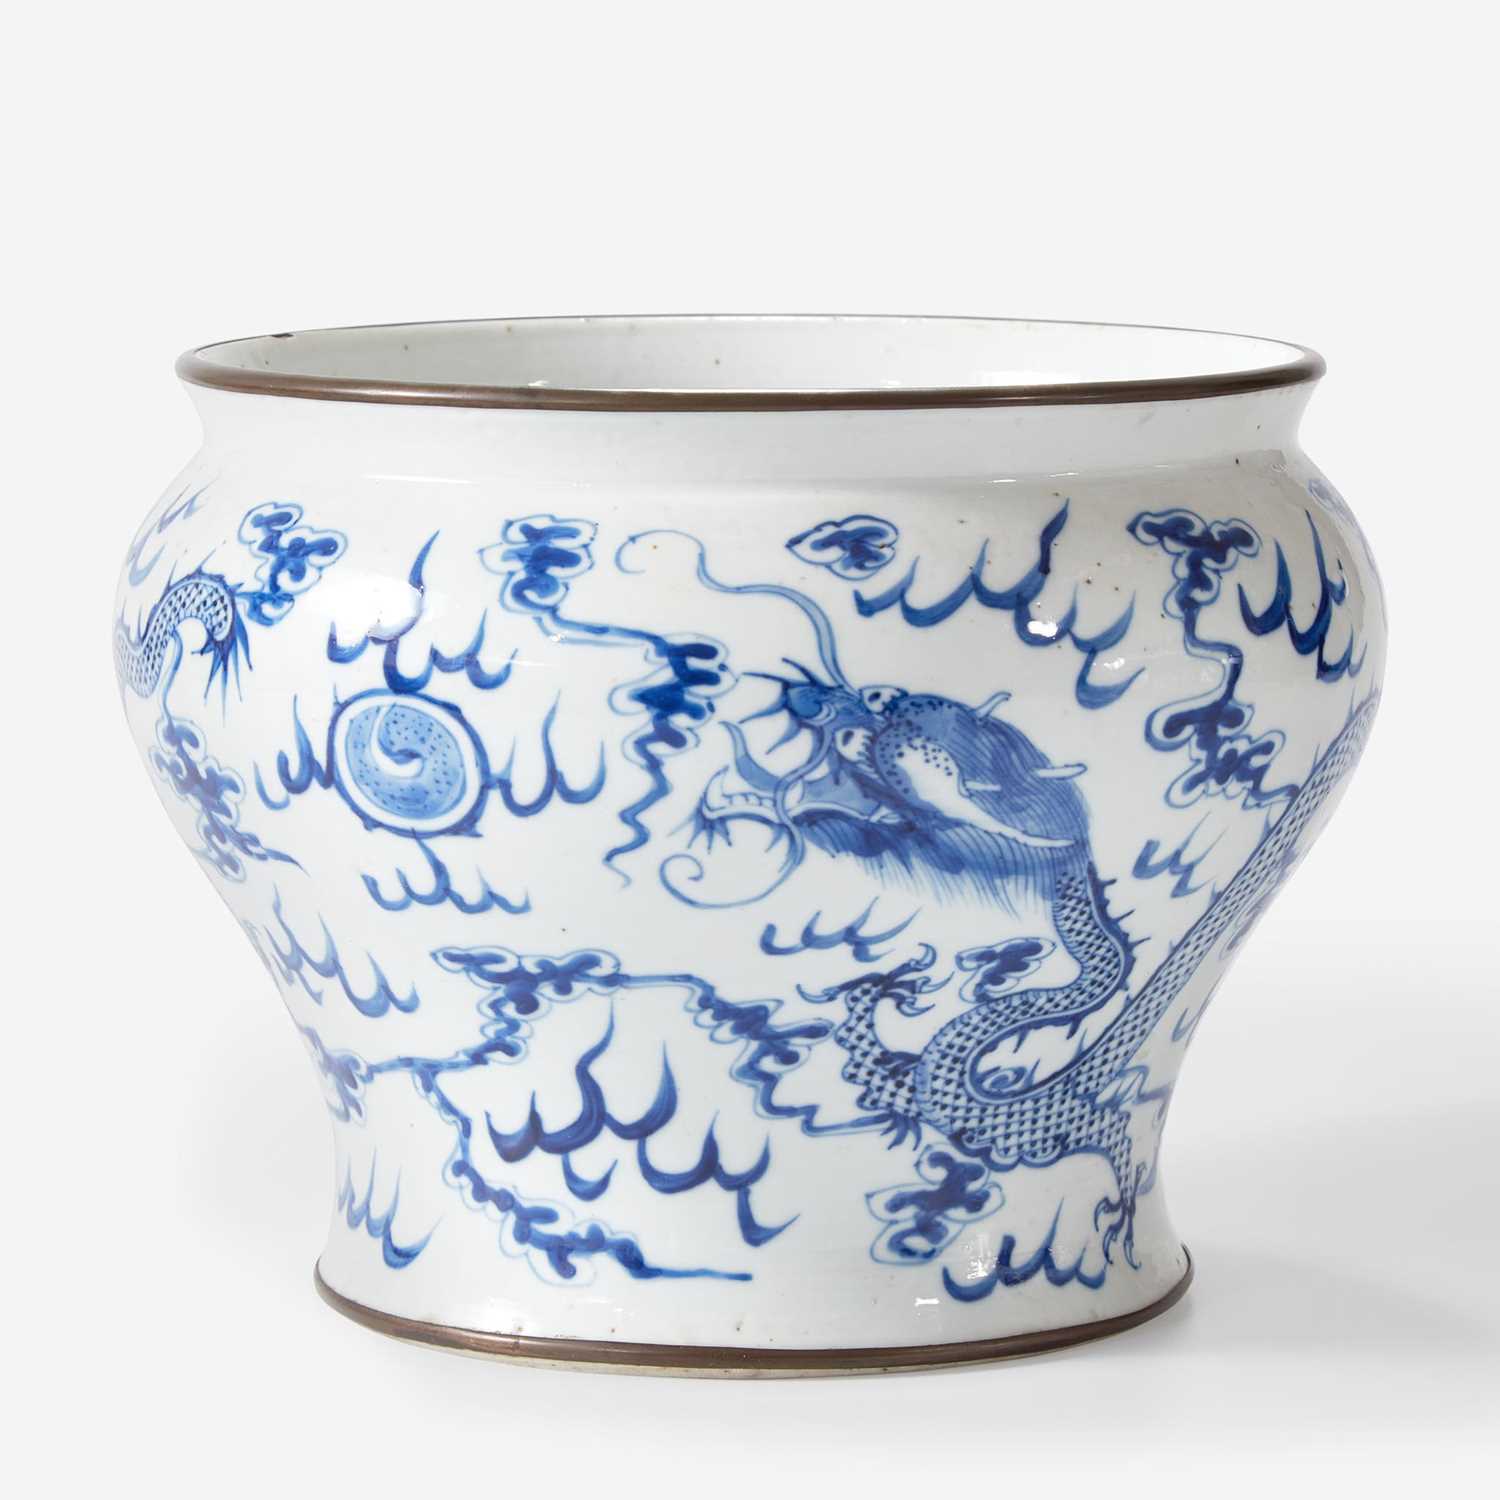 Lot 13 - A Chinese blue and white porcelain "Dragons" jar for the Thai market